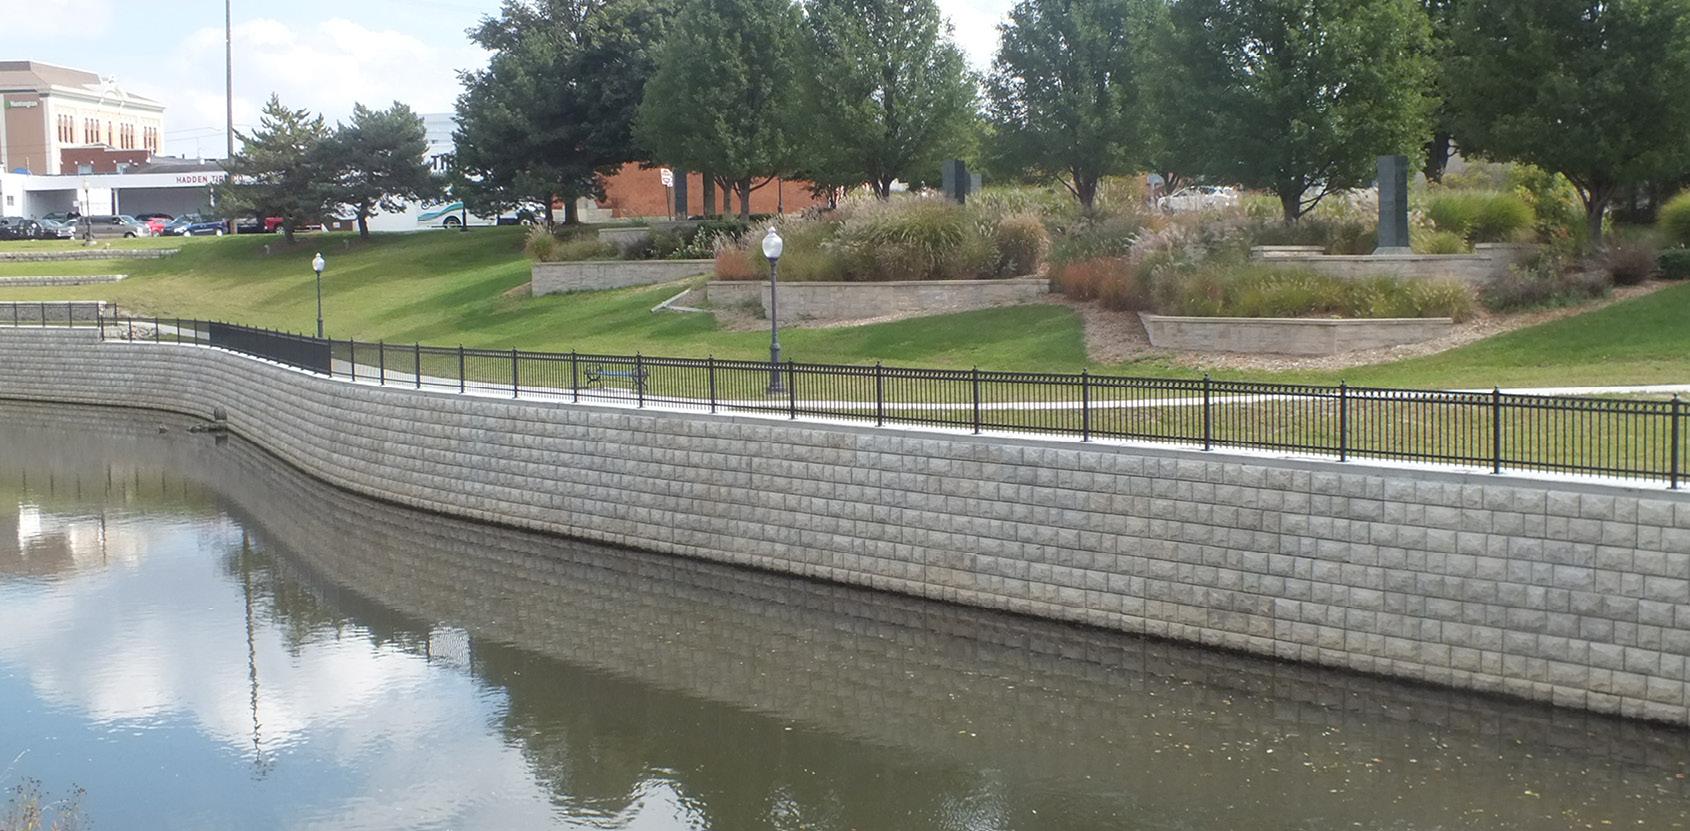 verti-block-retaining-wall-sends-timber-down-the-river-case study-apr22-img1